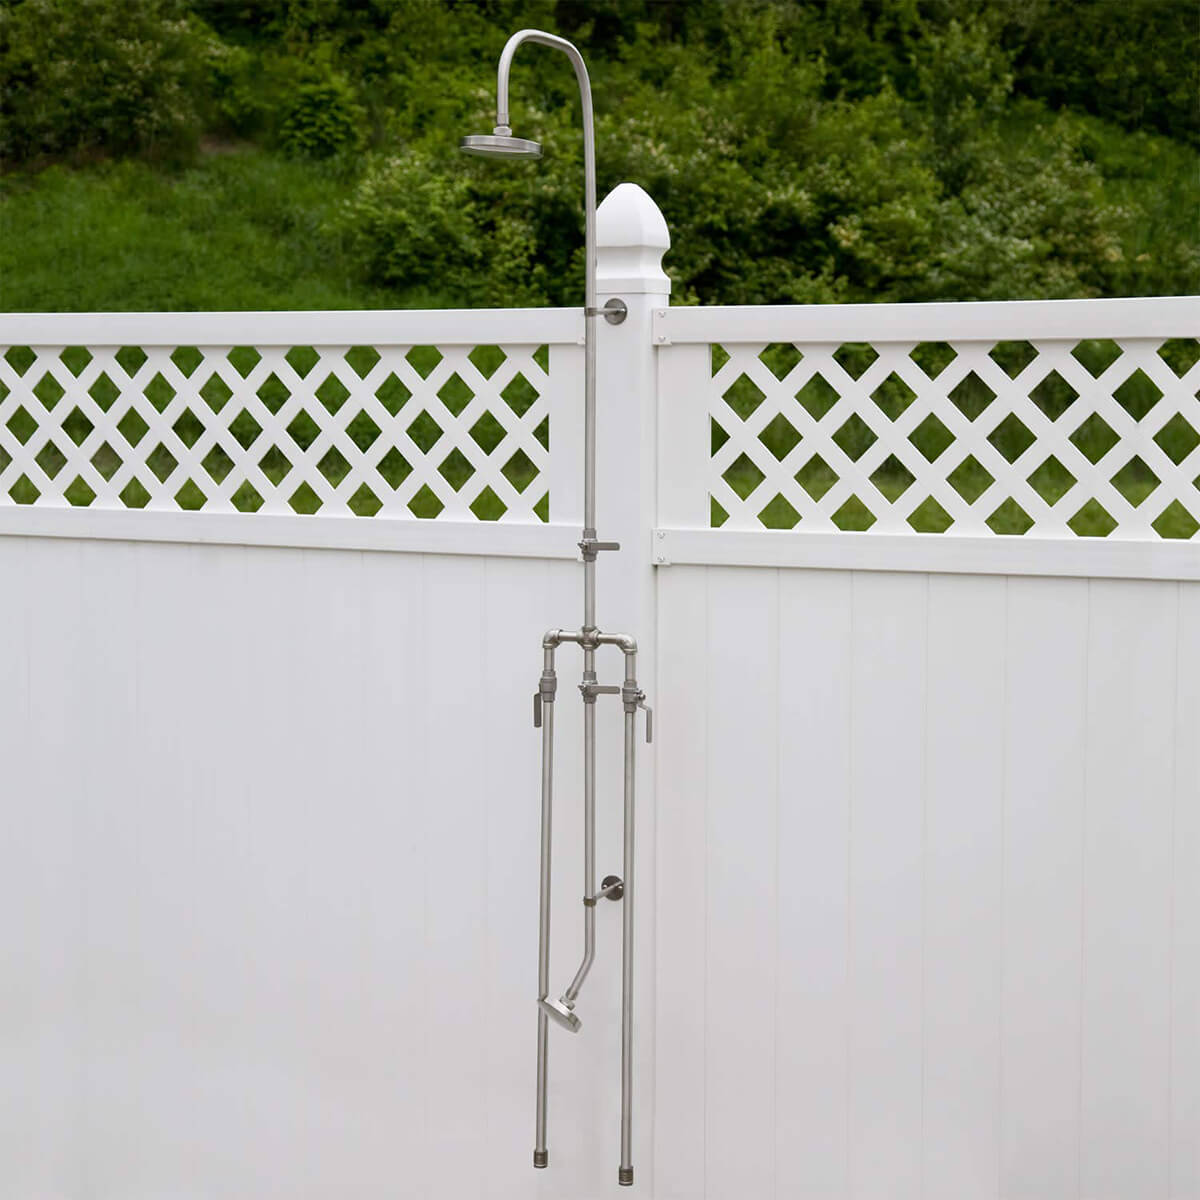 Simple Outdoor Shower Attached to Fence